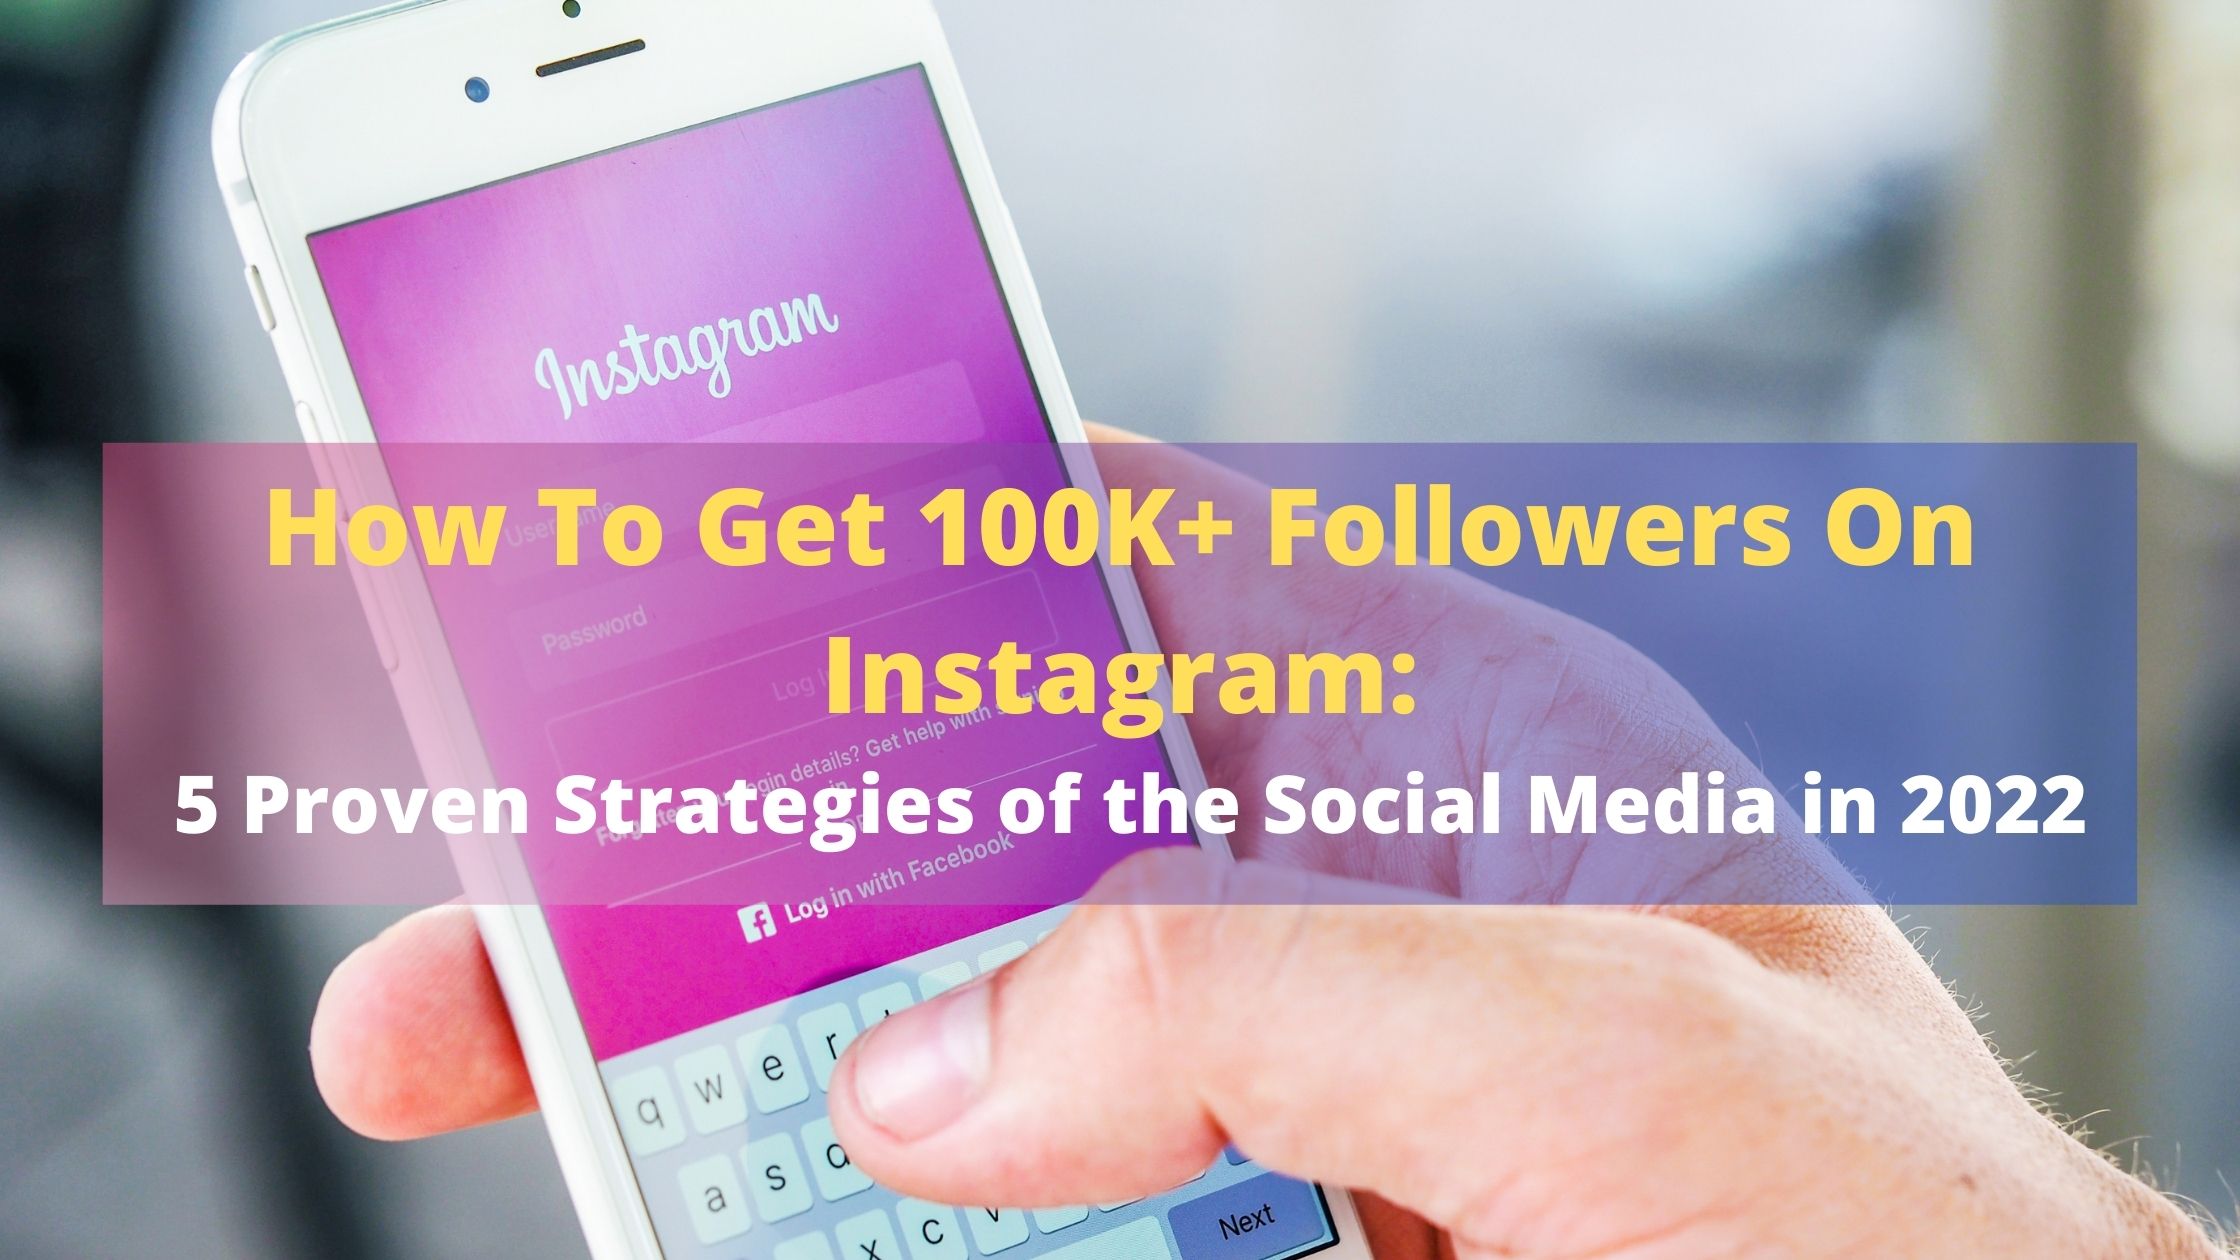 How To Get 100K+ Followers On Instagram The 5 Proven Strategies of the Social Media in 2022